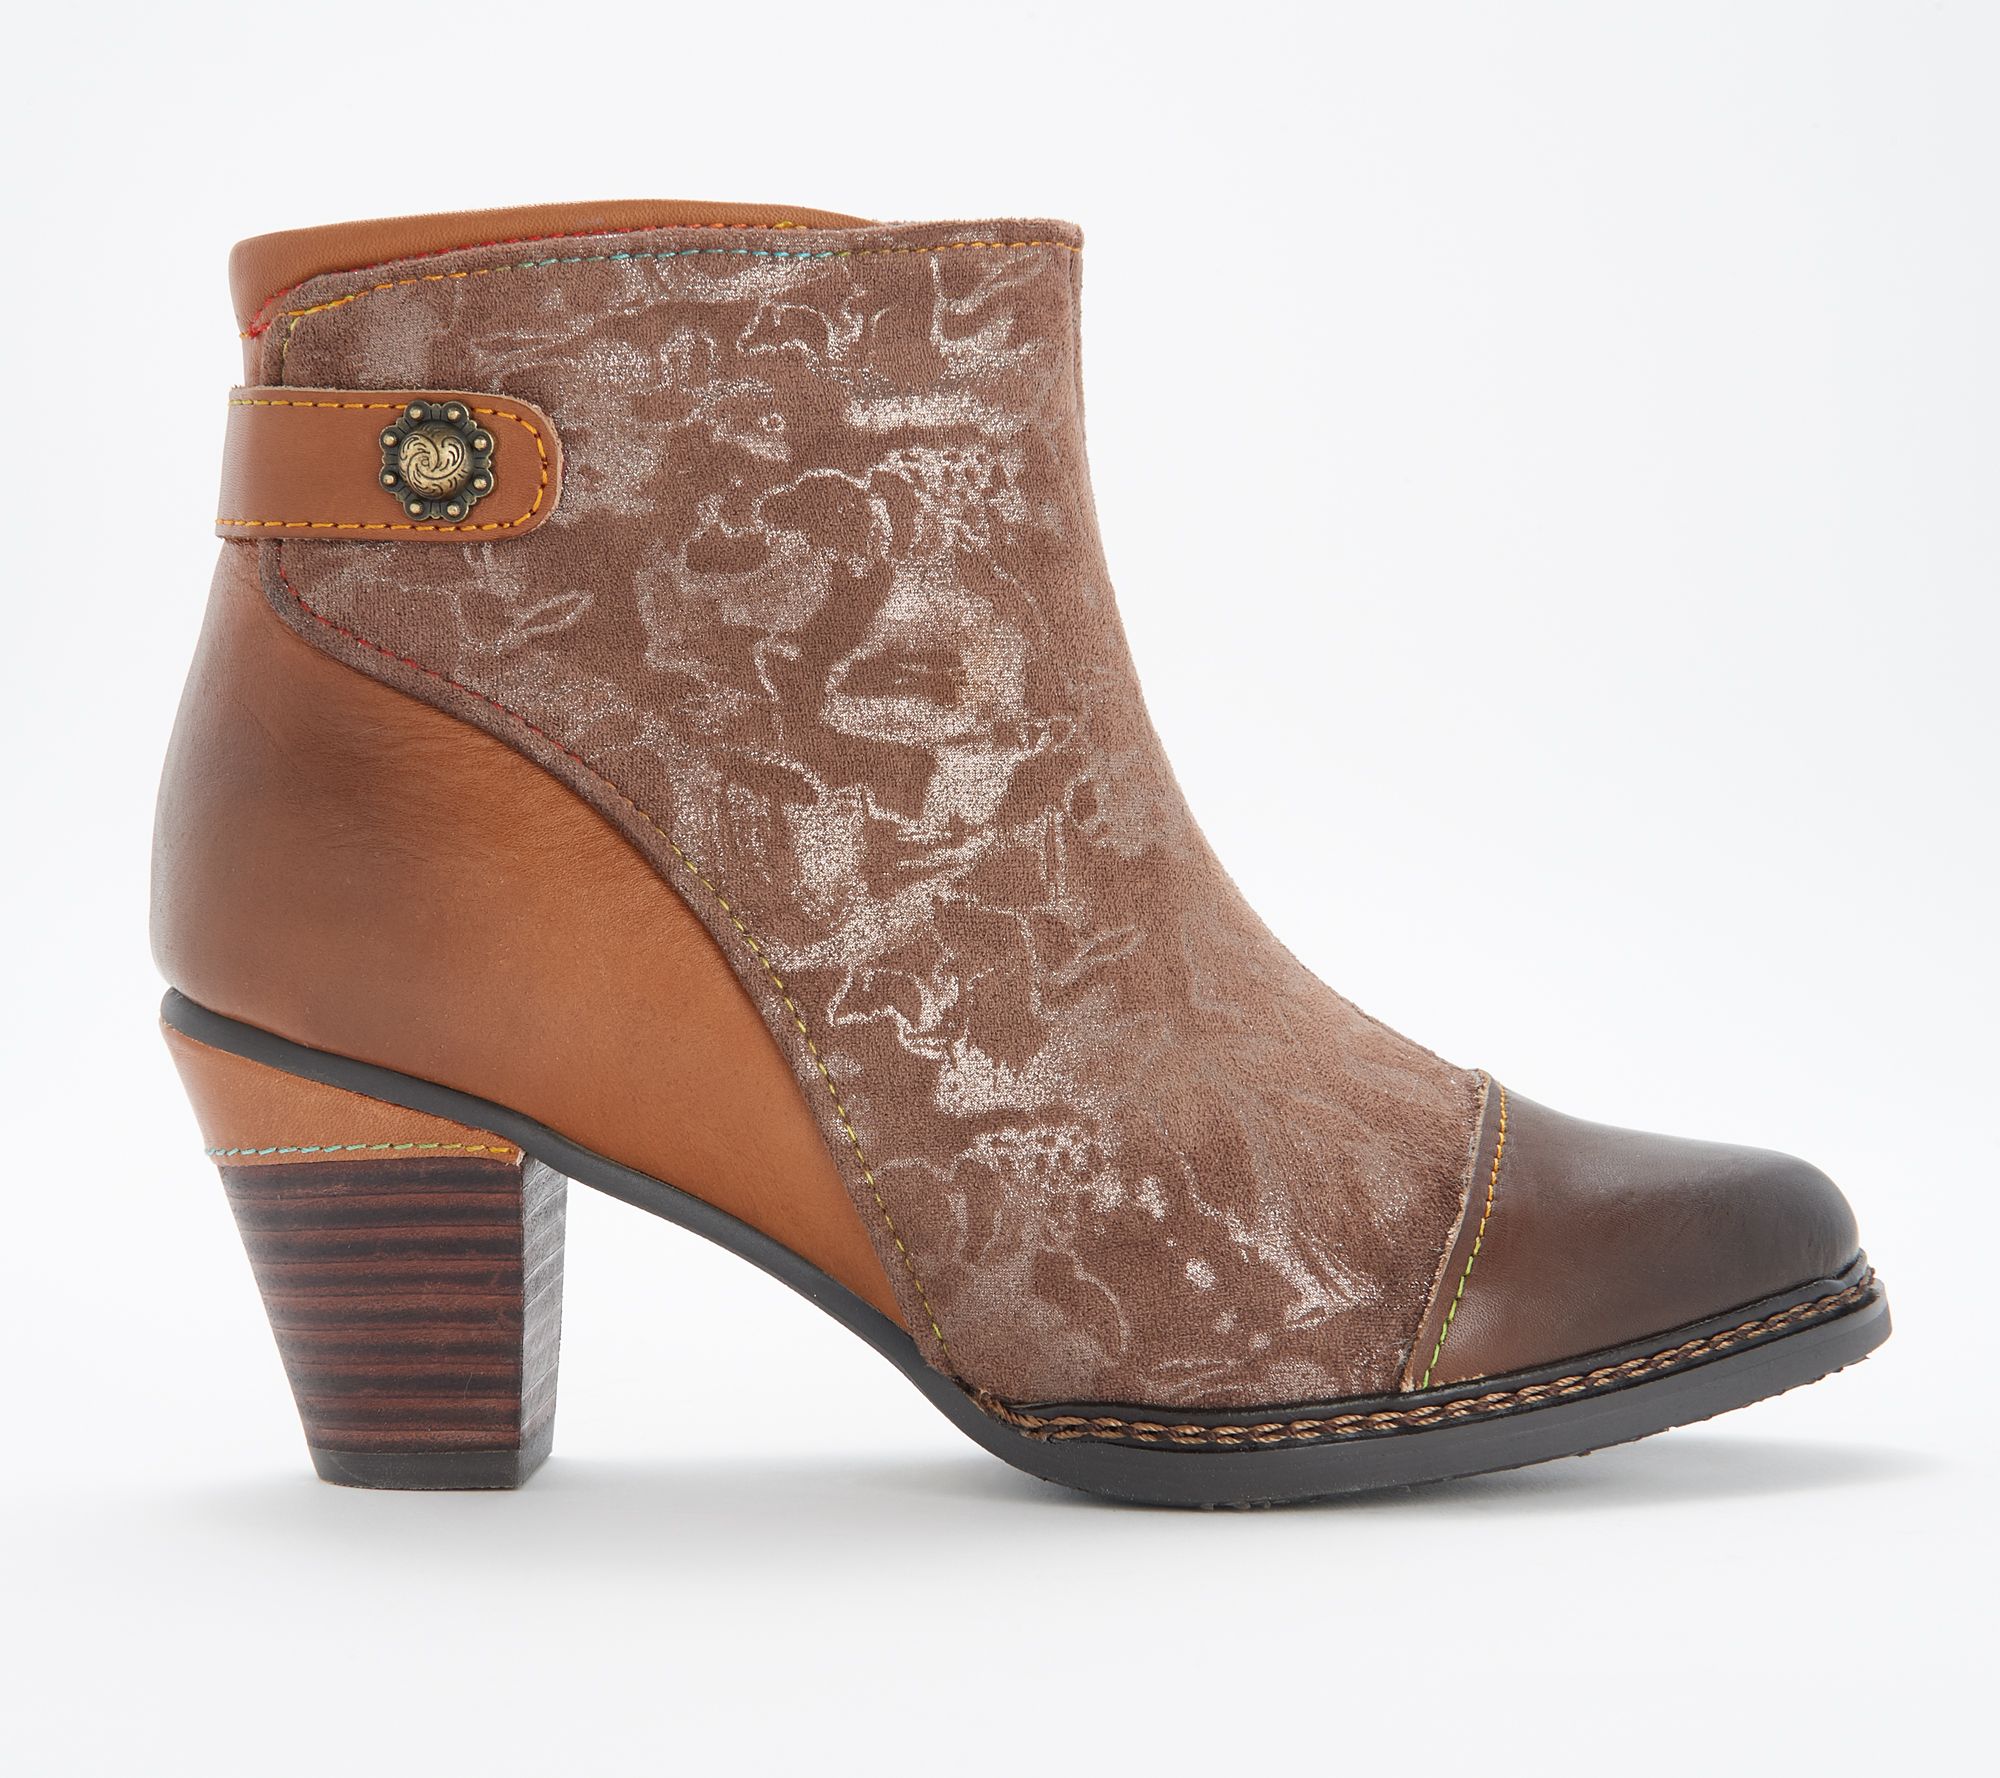 L'Artiste by Spring Step Leather Combo Ankle Boots- Socute - QVC.com